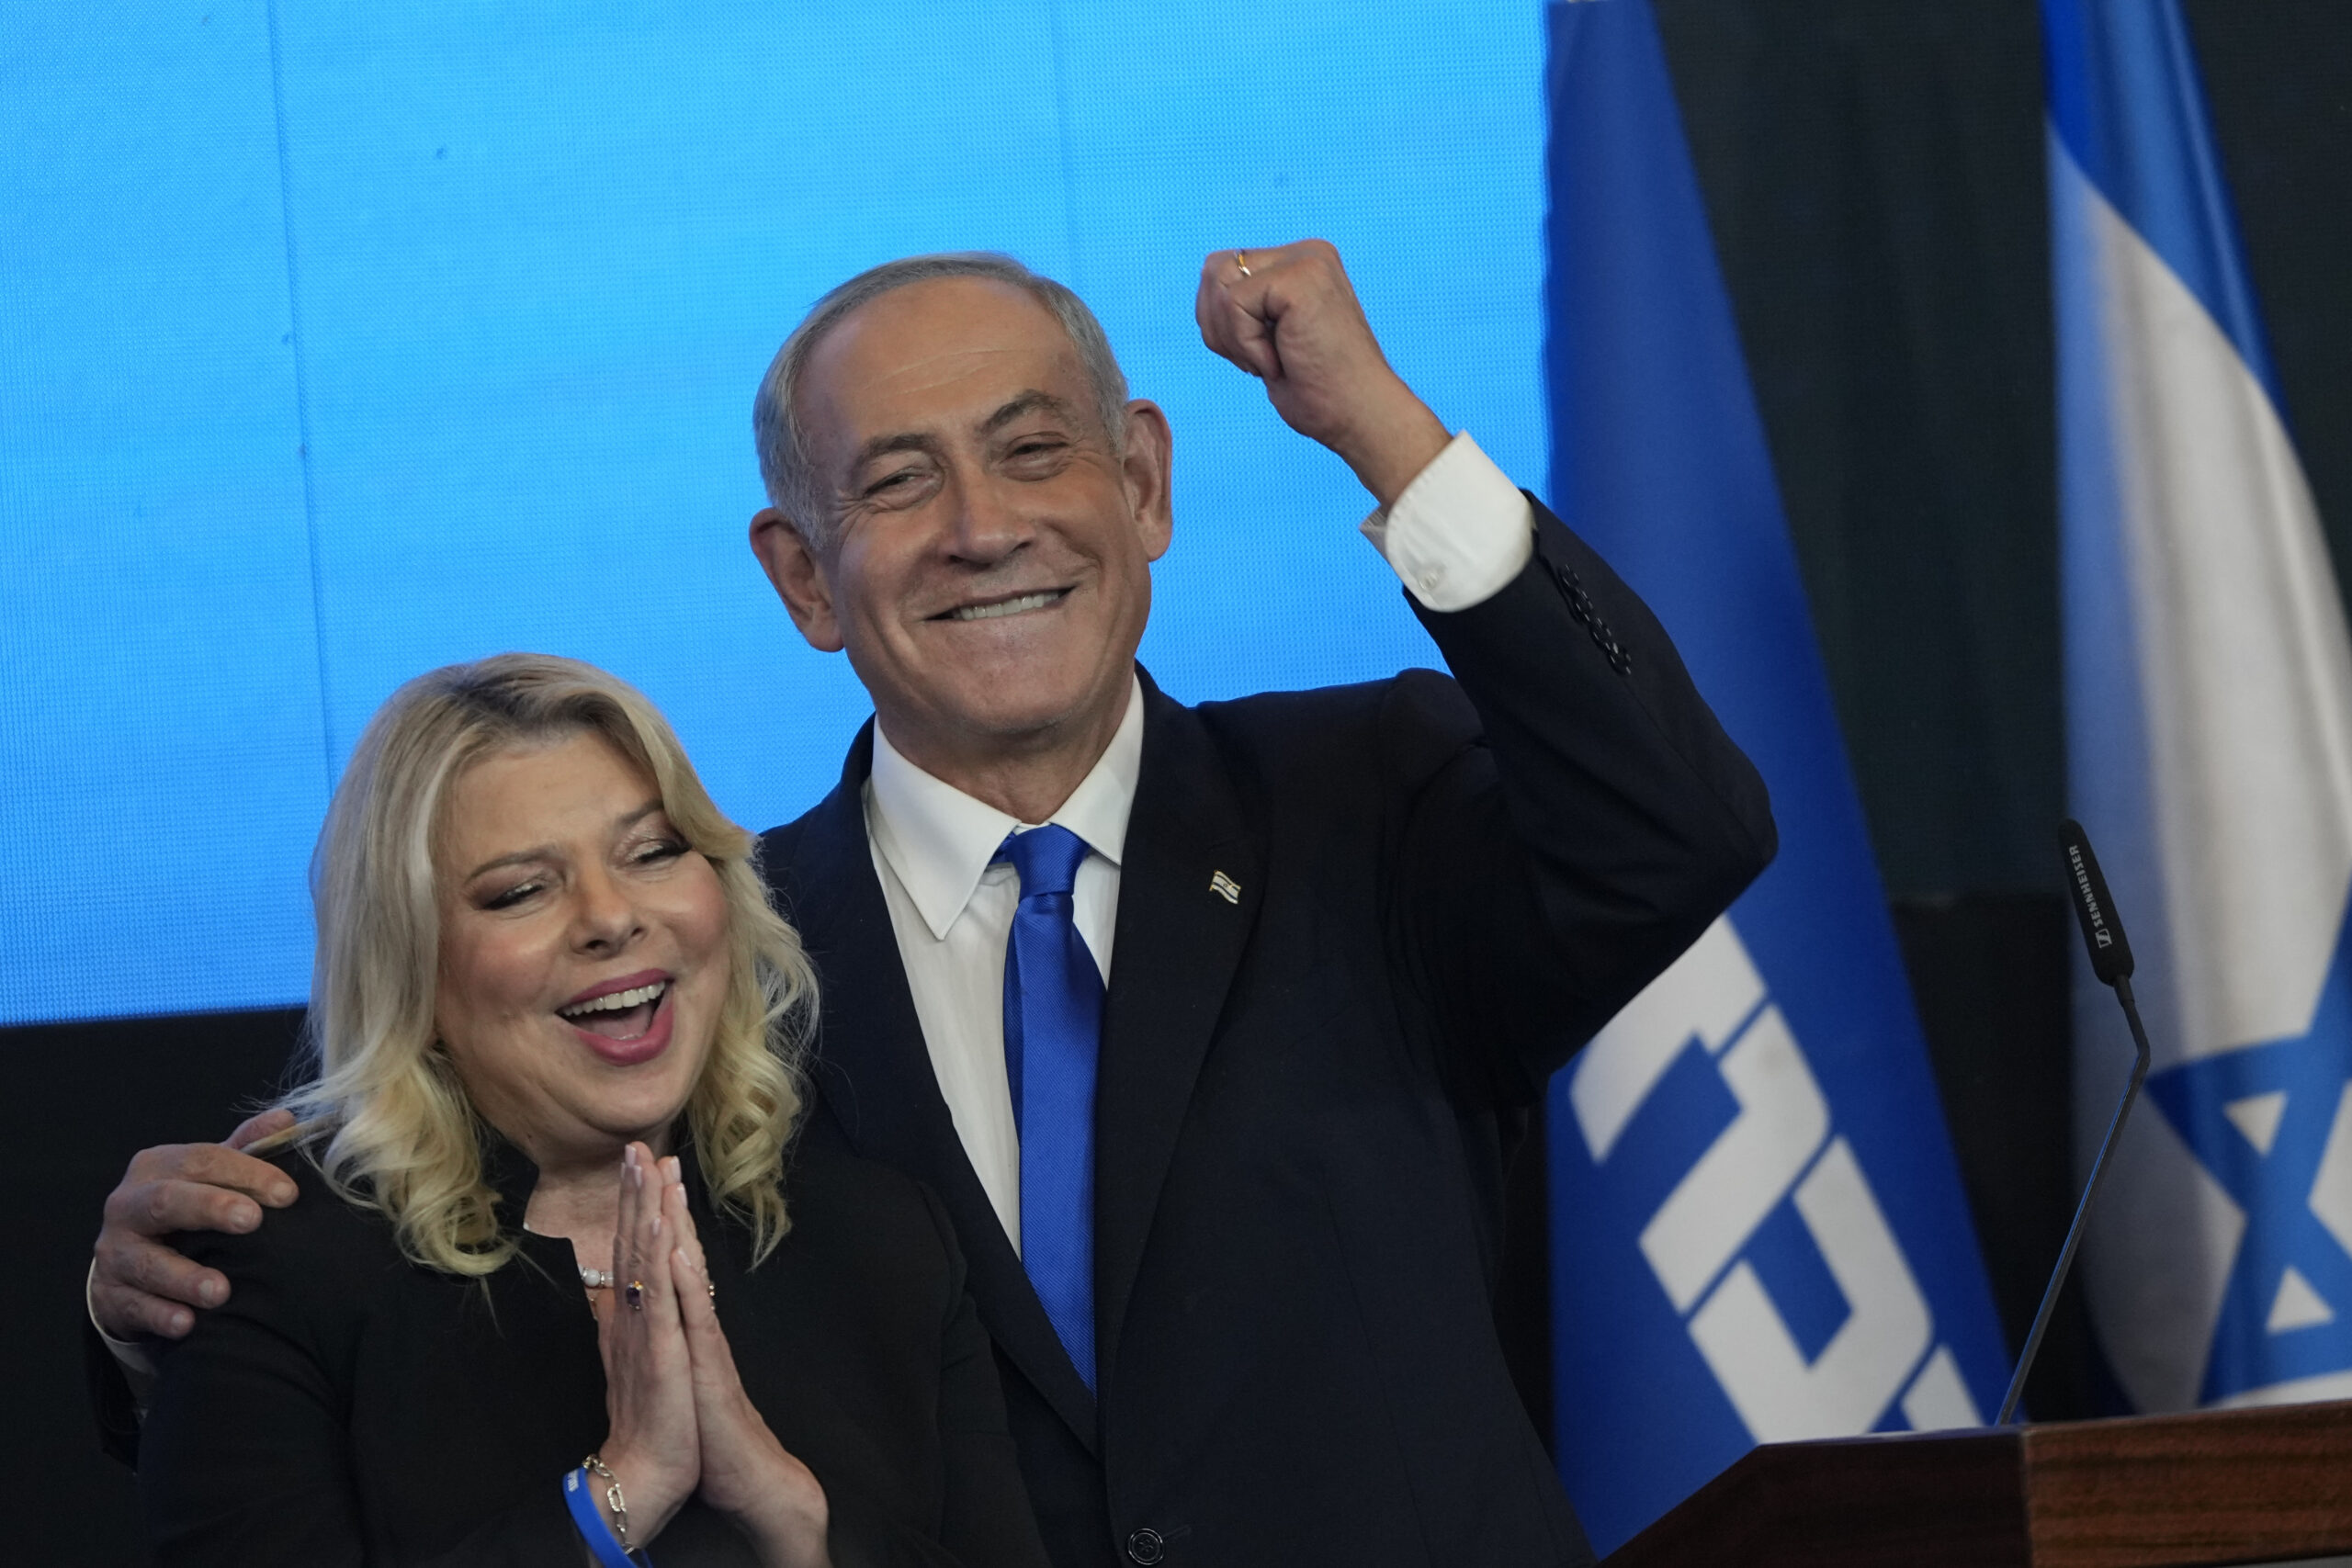 Former Israeli Prime Minister and the head of Likud party, Benjamin Netanyahu and his wife Sara gesture after first exit poll results for the Israeli Parliamentary election at his party's headquarters in Jerusalem, Wednesday, Nov. 2, 2022. (AP Photo/Tsafrir Abayov)